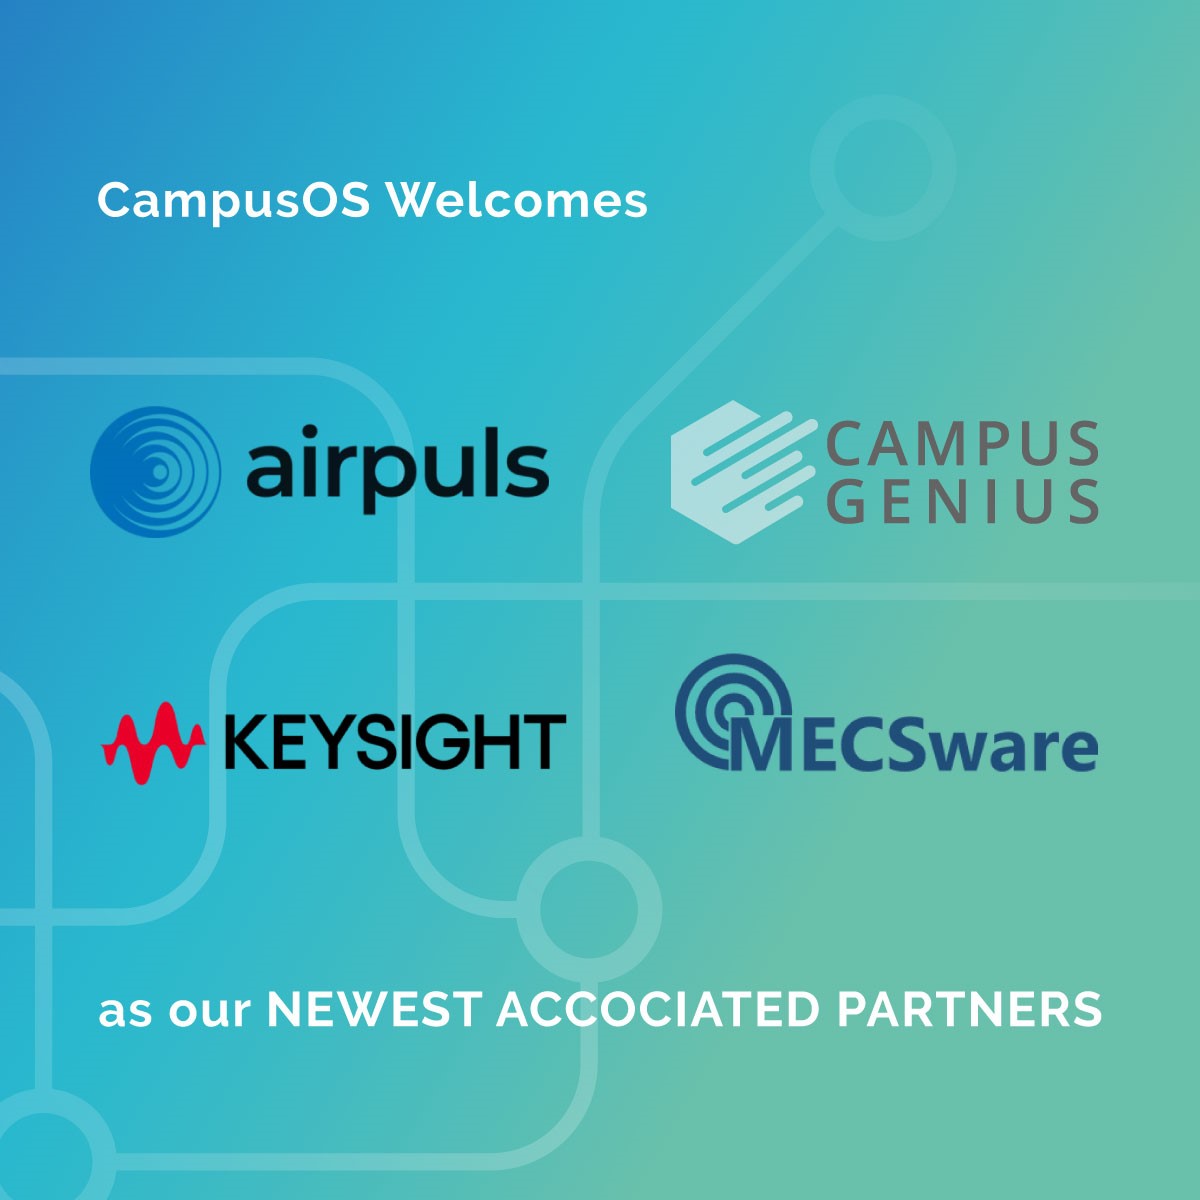 #CampusOS is welcoming four new associated partners: CampusGenius, MECSware, @Keysight & airpuls 🚀
Learn how they contribute to our project of creating tailor-made #5G #CampusNetworks for industry through open and interoperable network components.
👉hhi.fraunhofer.de/en/news/nachri…